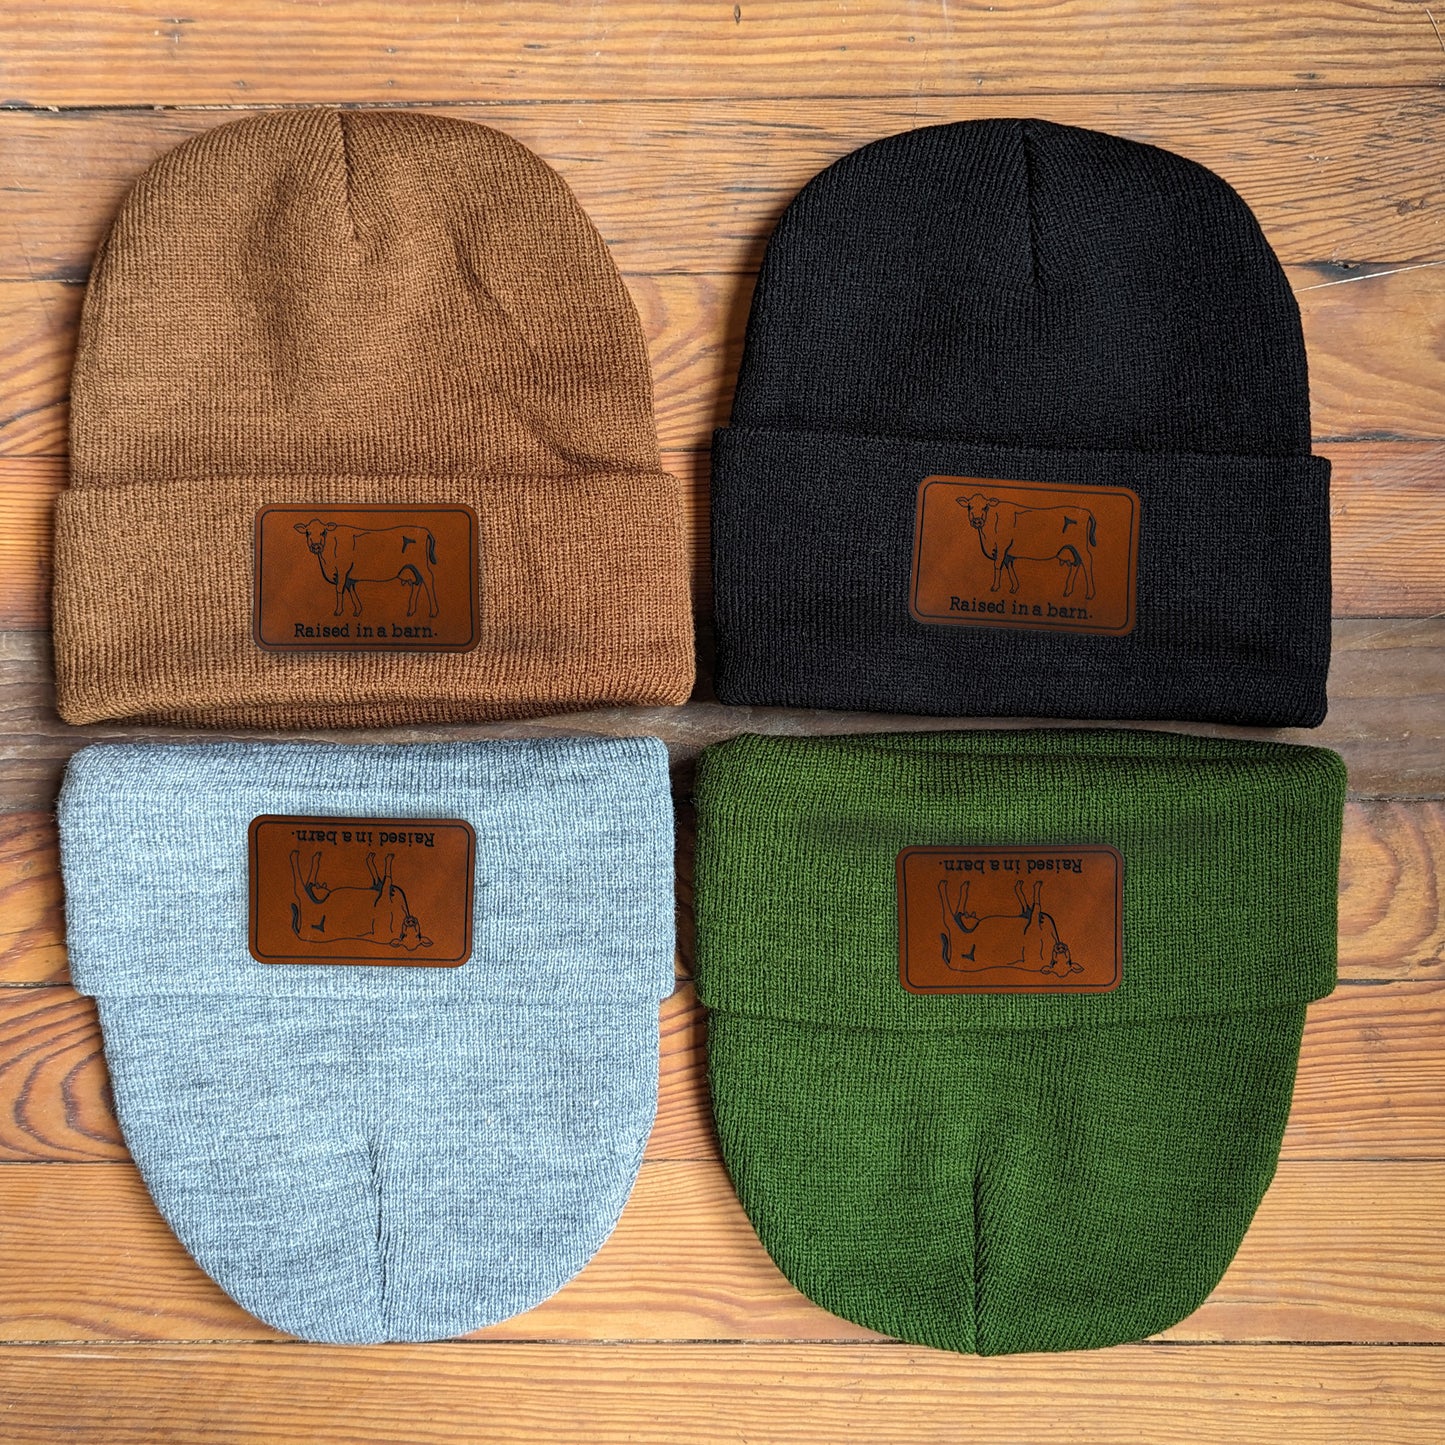 "Raised in a Barn" COW, Farm Life Country Kid Beanie | One Size Fits All | FOUR Color Options